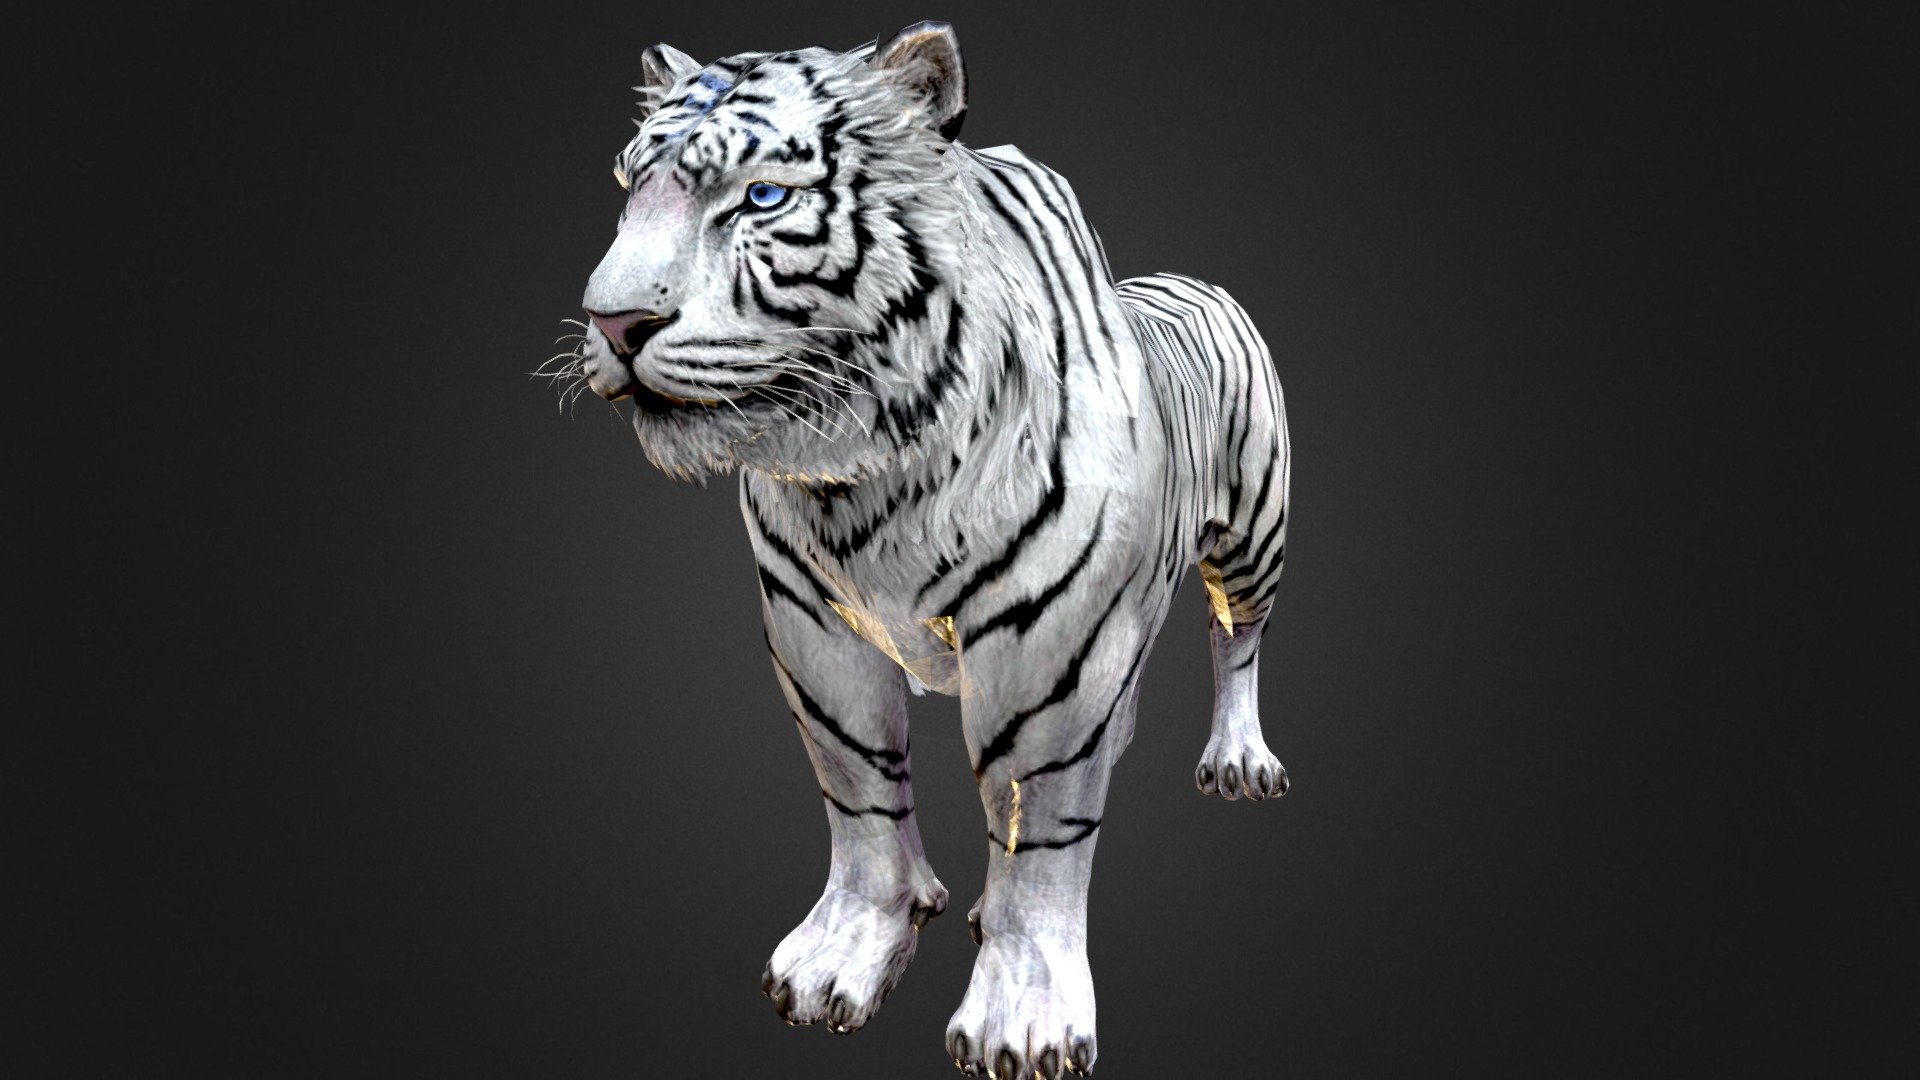 High detail and realistic KING WHITE TIGER 3D models JUNGLE ANIMALS RDAM ,
This is a 3D ANIMAL high-end photorealistic 3D models of ANIMALS JUNGLE called REY WHITE TIGER 3D MODEL Animated DE LA JUNGLA in Blender. 
DOWNLOAD WHITE TIGER: https://sites.google.com/view/3d-models-download-rdam/models-3ds-max-maya-c4d-unity-unreal-blender

You can check the individual model
45240/45240 - ID of TIGER WHITE 3D RDAM Animated

Originally created with 3ds Max 2016 and saved as BLENDER AND 3ds Max 2013

SCENE objects:

You can check the full list of objects via VIDEO in presentation images

Please check out my other models, just click on my user name to see complete gallery RDAM STUDIO
Thank you for choosing my model, I hope you like it!
Rig Description

BLENDER 3.0
&lsquo;Auto rig PRO'
&lsquo;complet facial rig' - White Tiger - 3D model by Rdam 3D Pictures (@rdam) 3d model